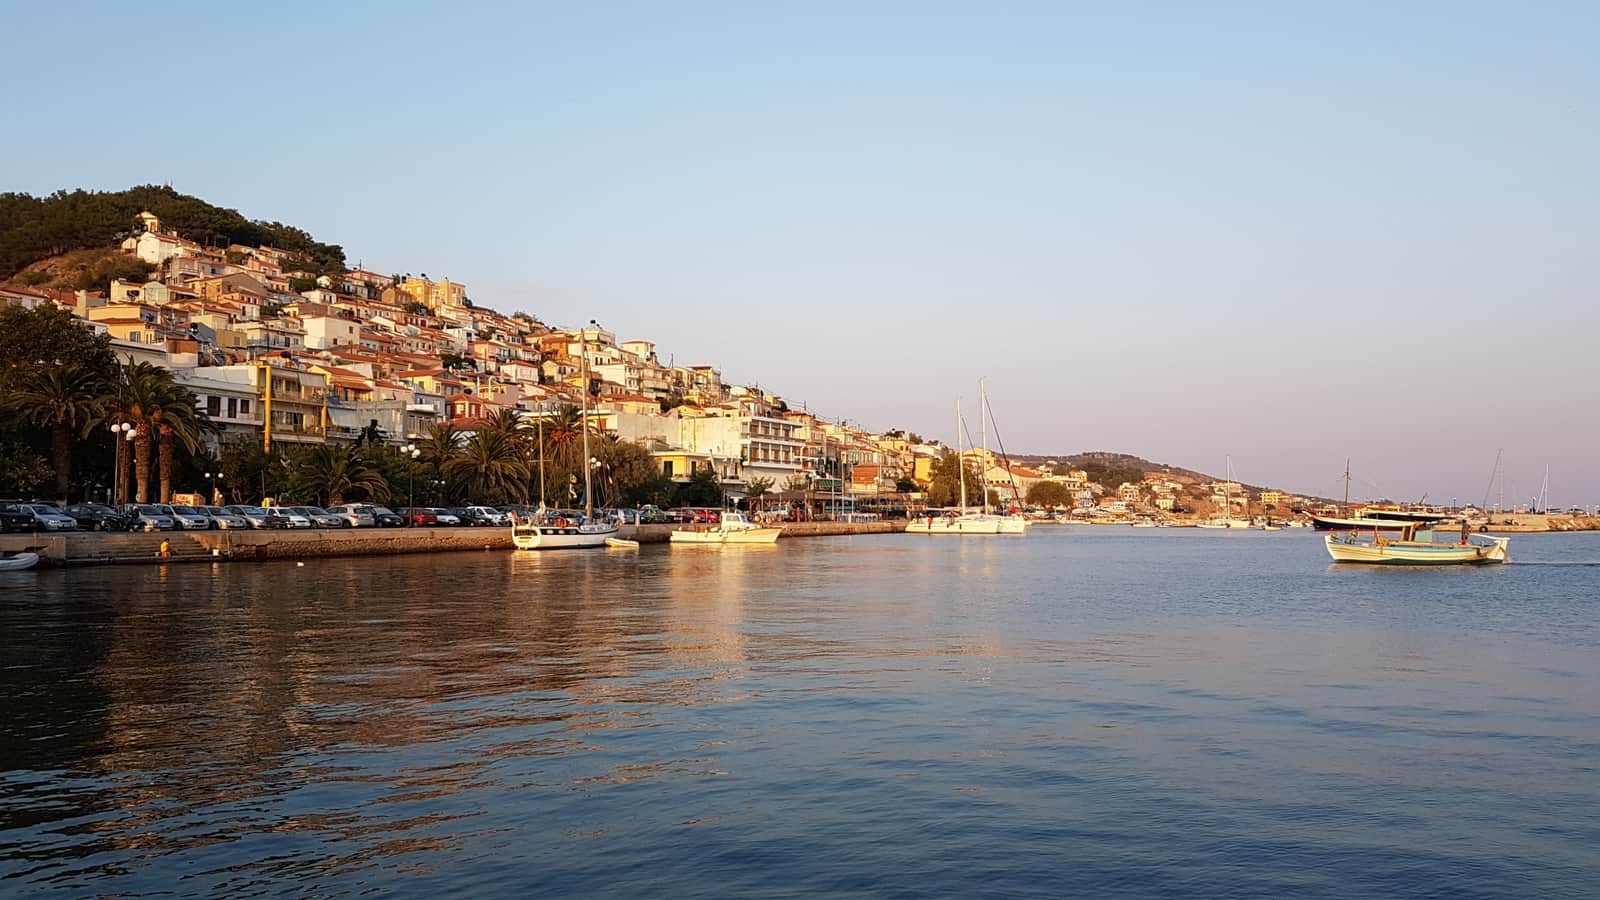 Plomari is the second largest town of Lesbos after Mytilene, Greece. 